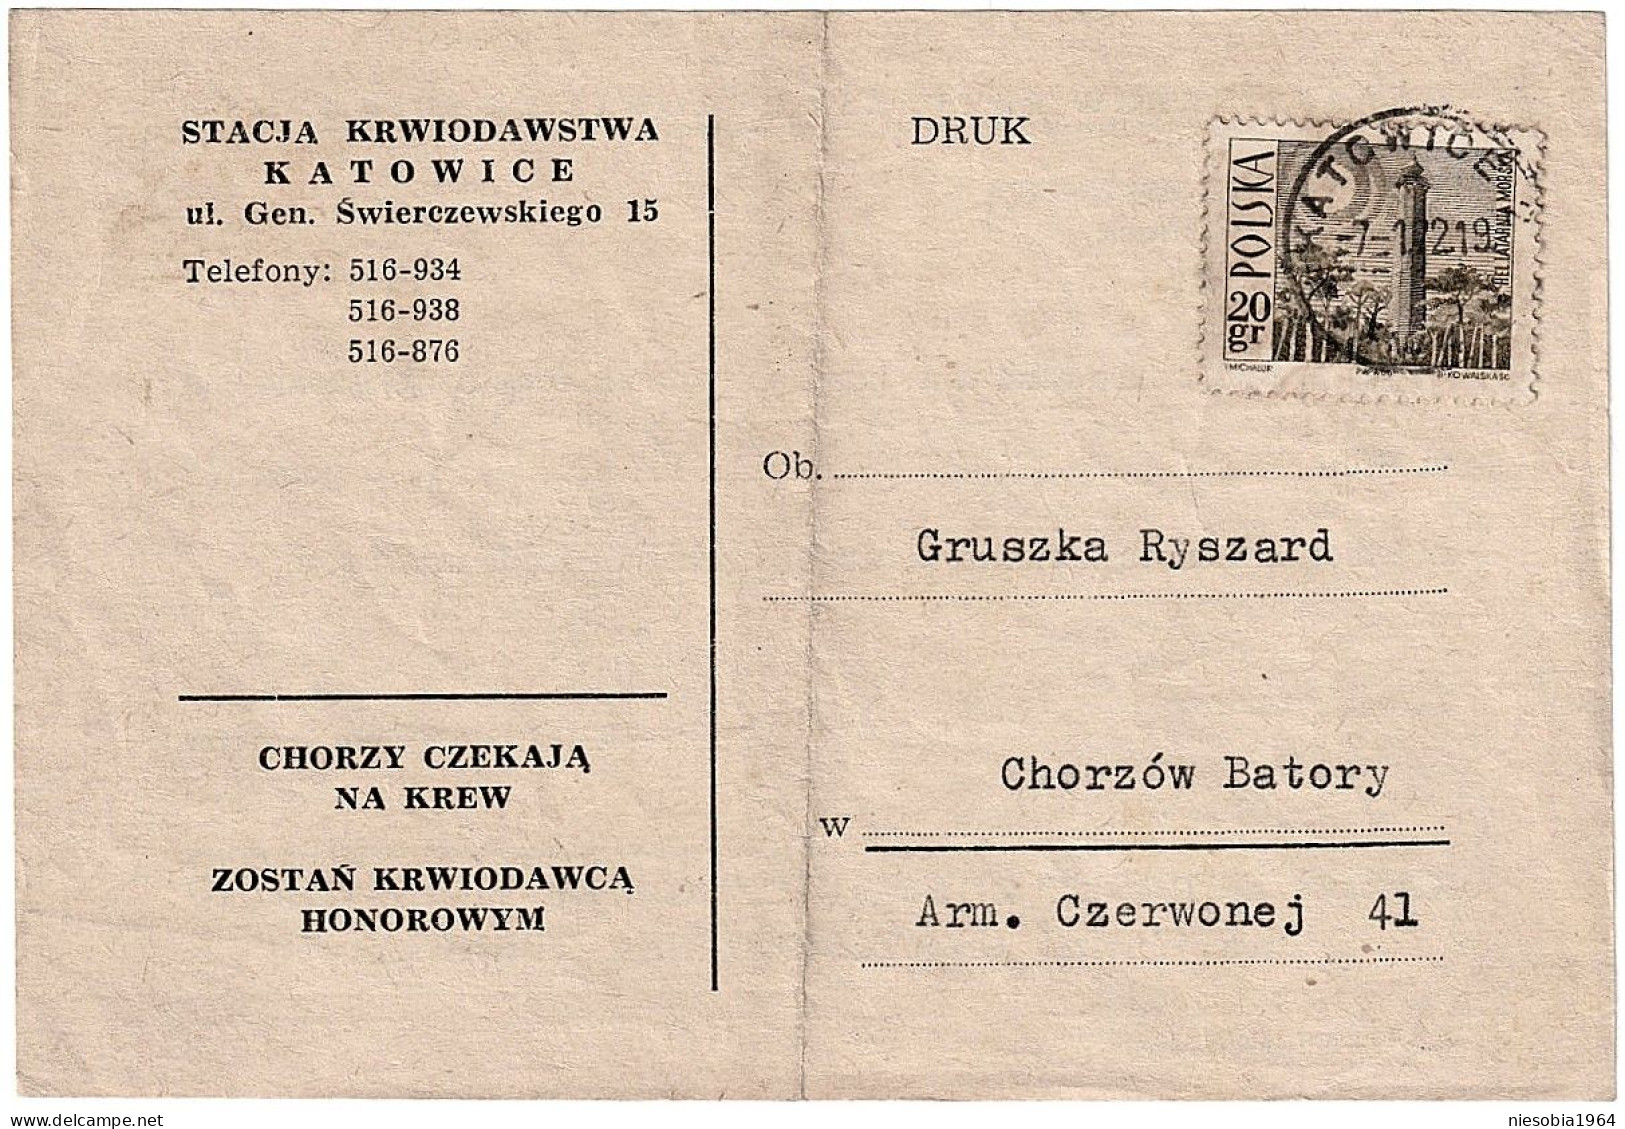 Official Postcard - Honorary Blood Donation Station In Katowice Call For Mandatory Blood Donation Stamp And Seal 7/01/72 - Stamped Stationery